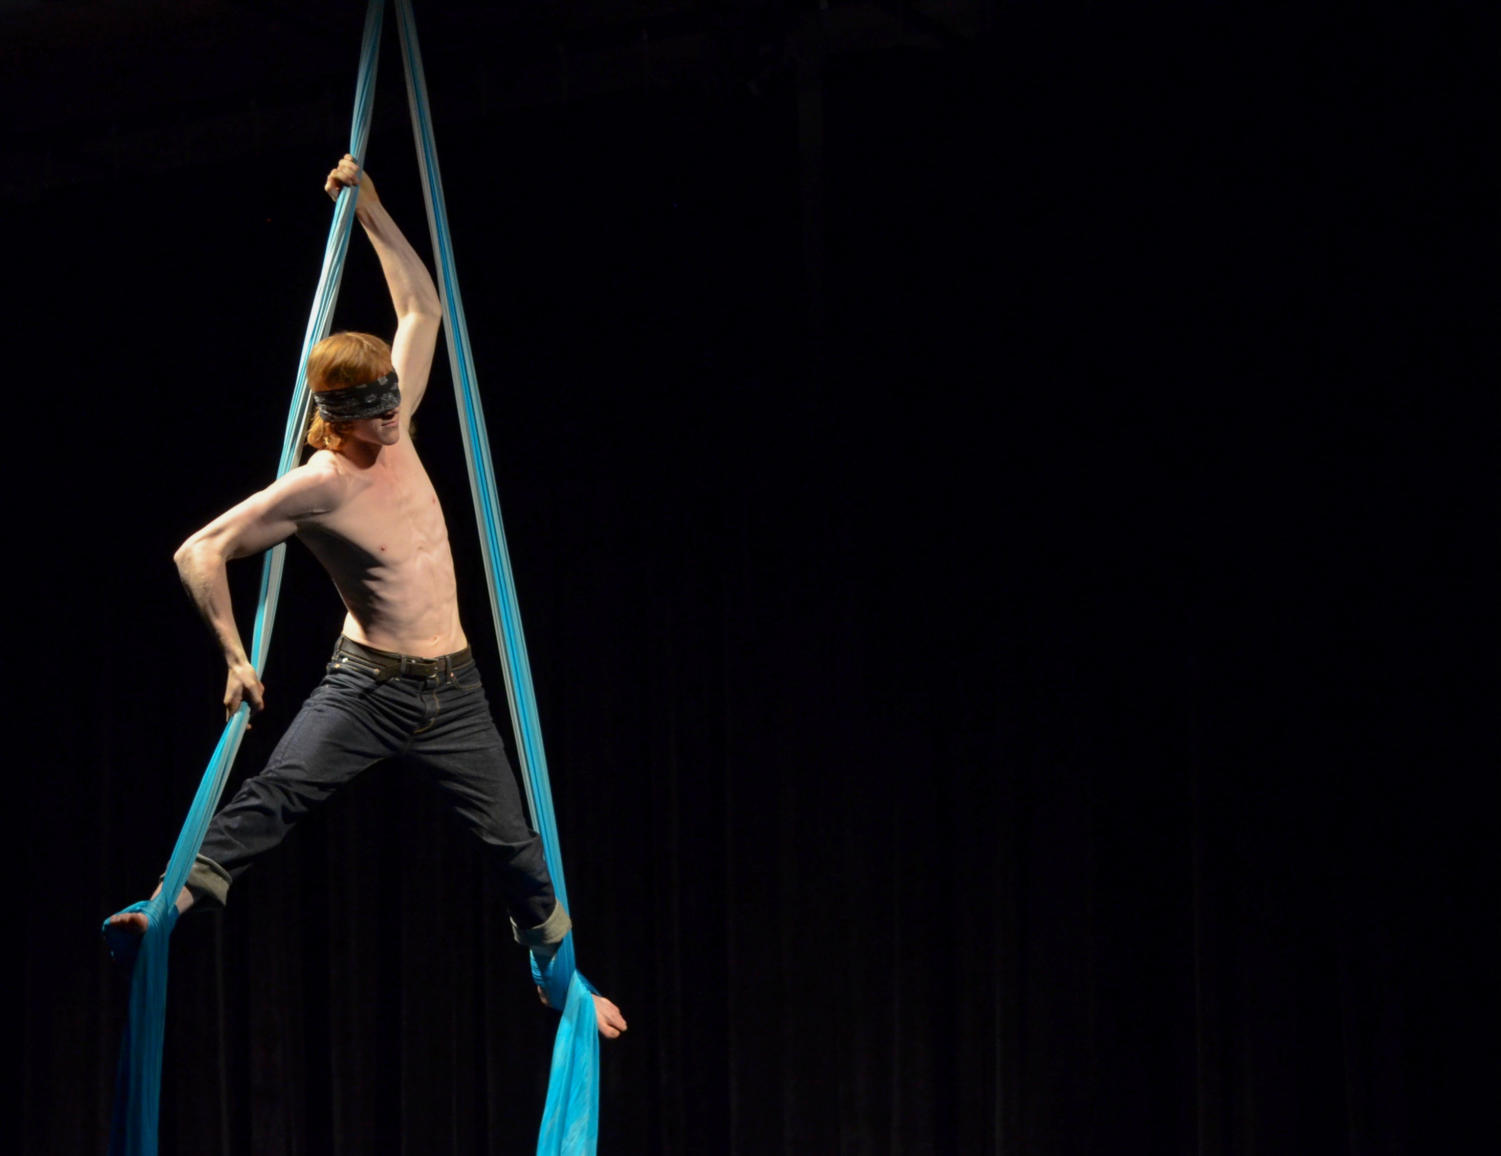 Third-year Daniel Heins performs a silks act while blindfolded.